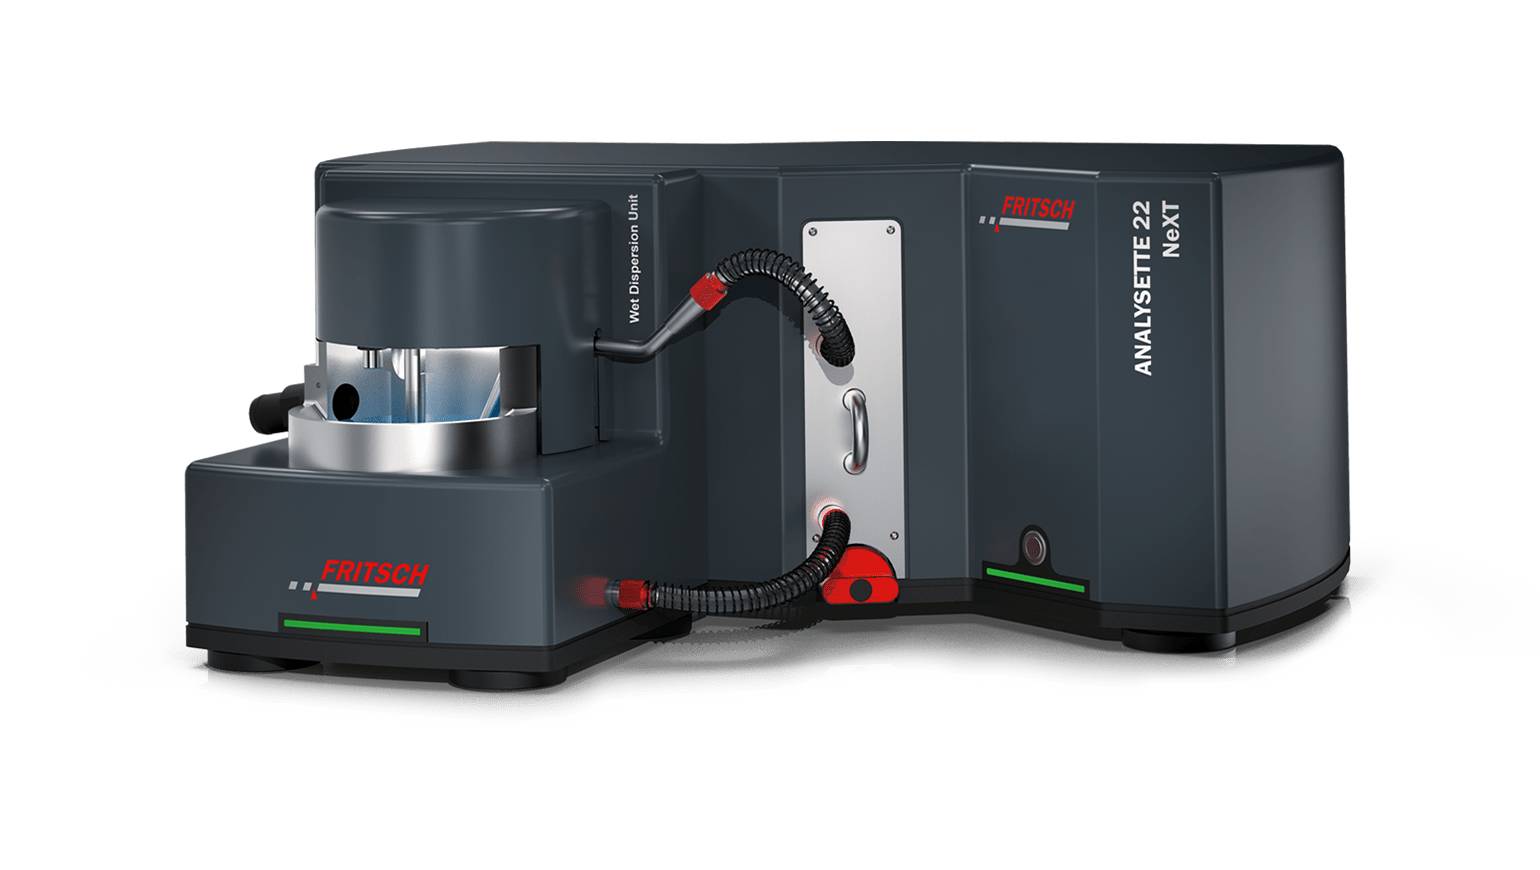 Unbeatable priced and with a unique measuring range from 0.01–3800 microns Ideal for particle size analysis in production and quality control, research and development